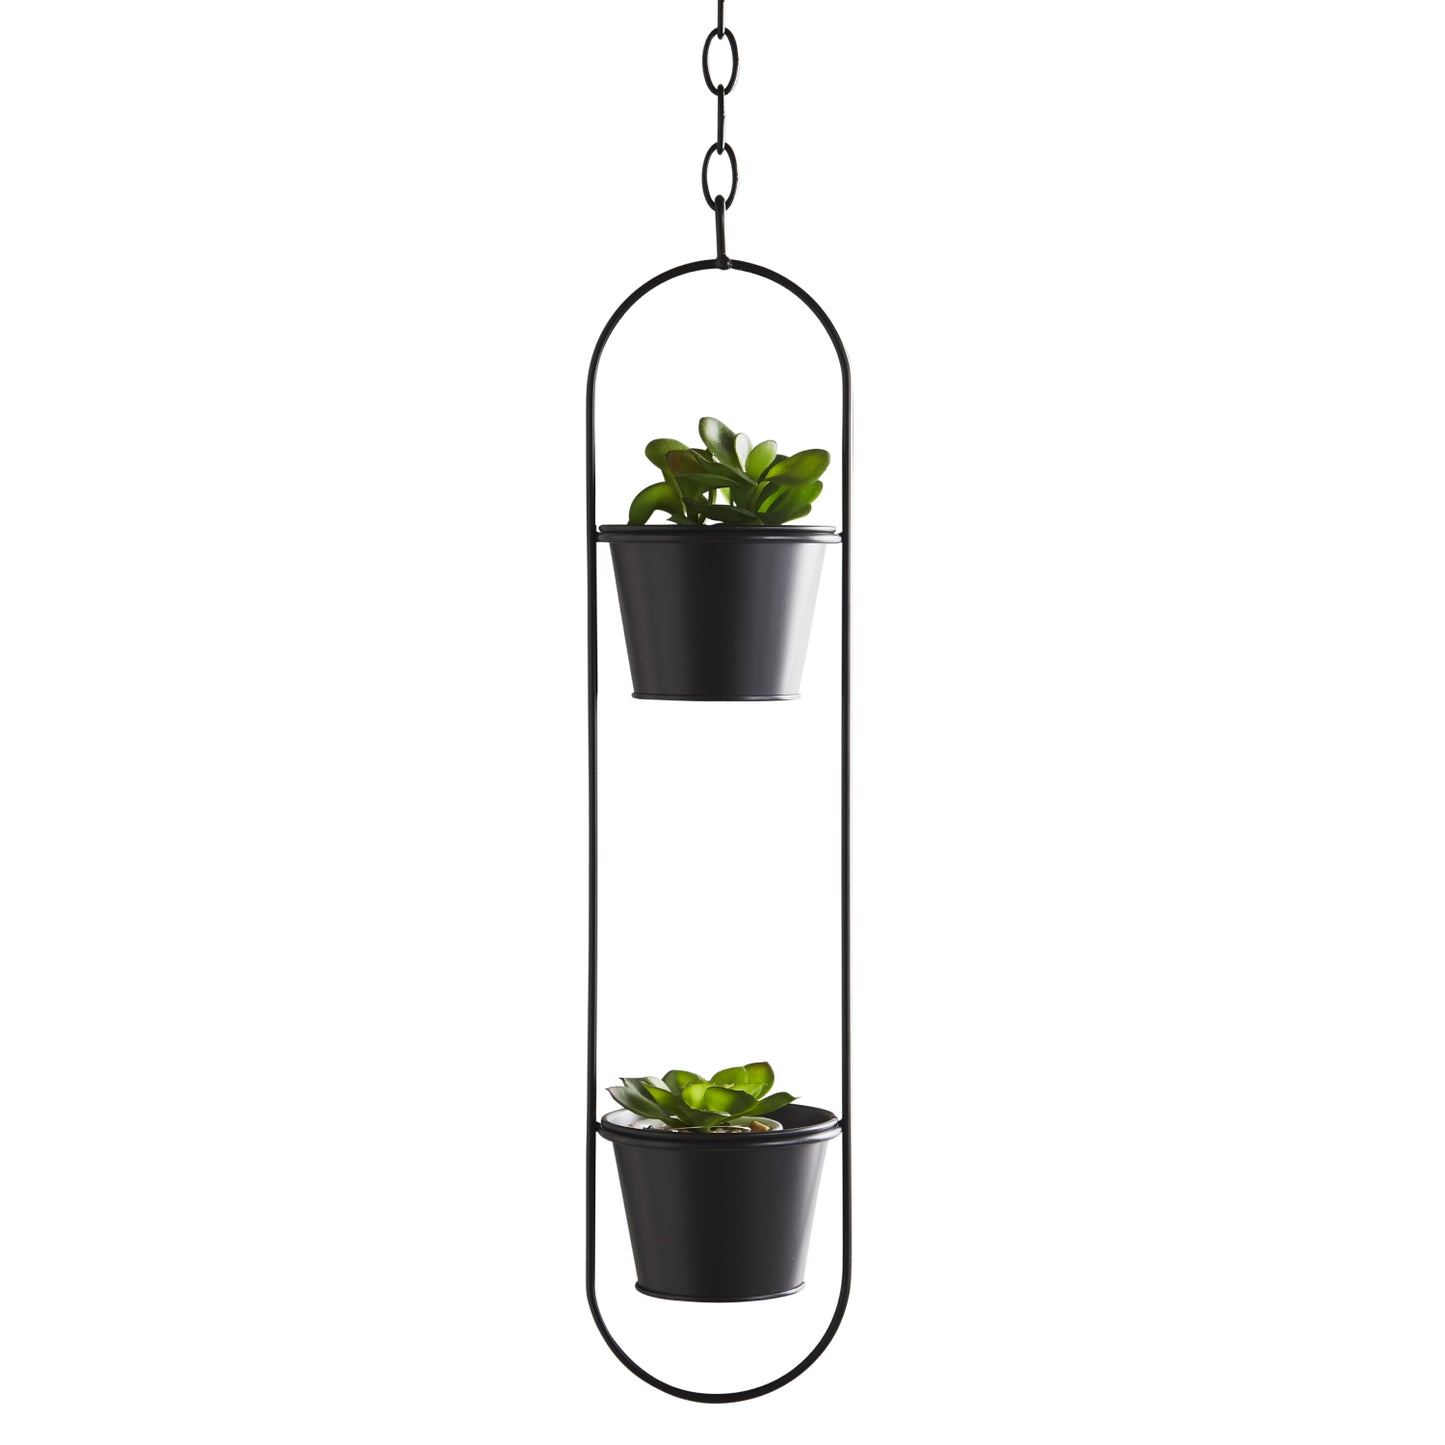 Small duo black hanging plant holder by Native